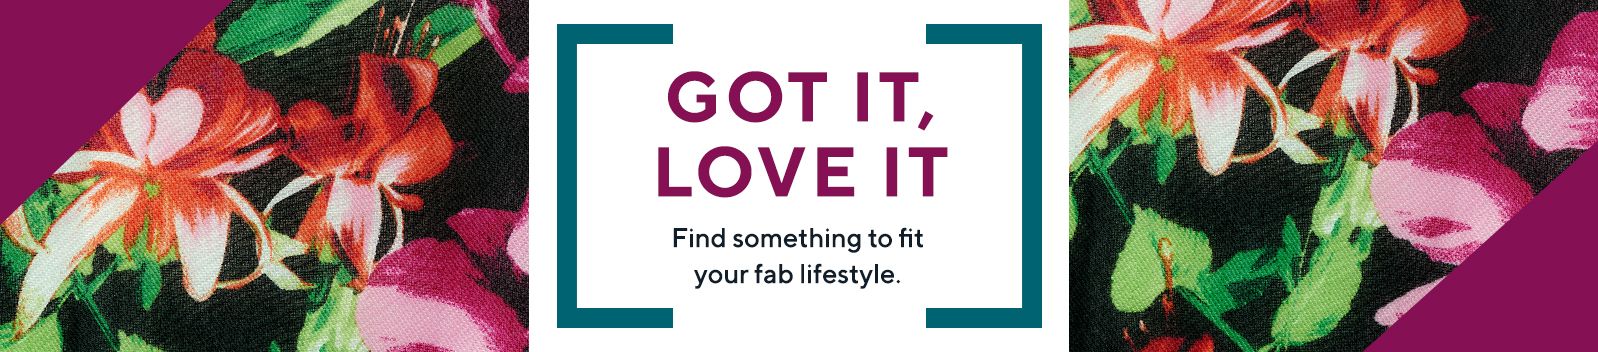 GOT IT, LOVE IT  Find something to fit your fab lifestyle.